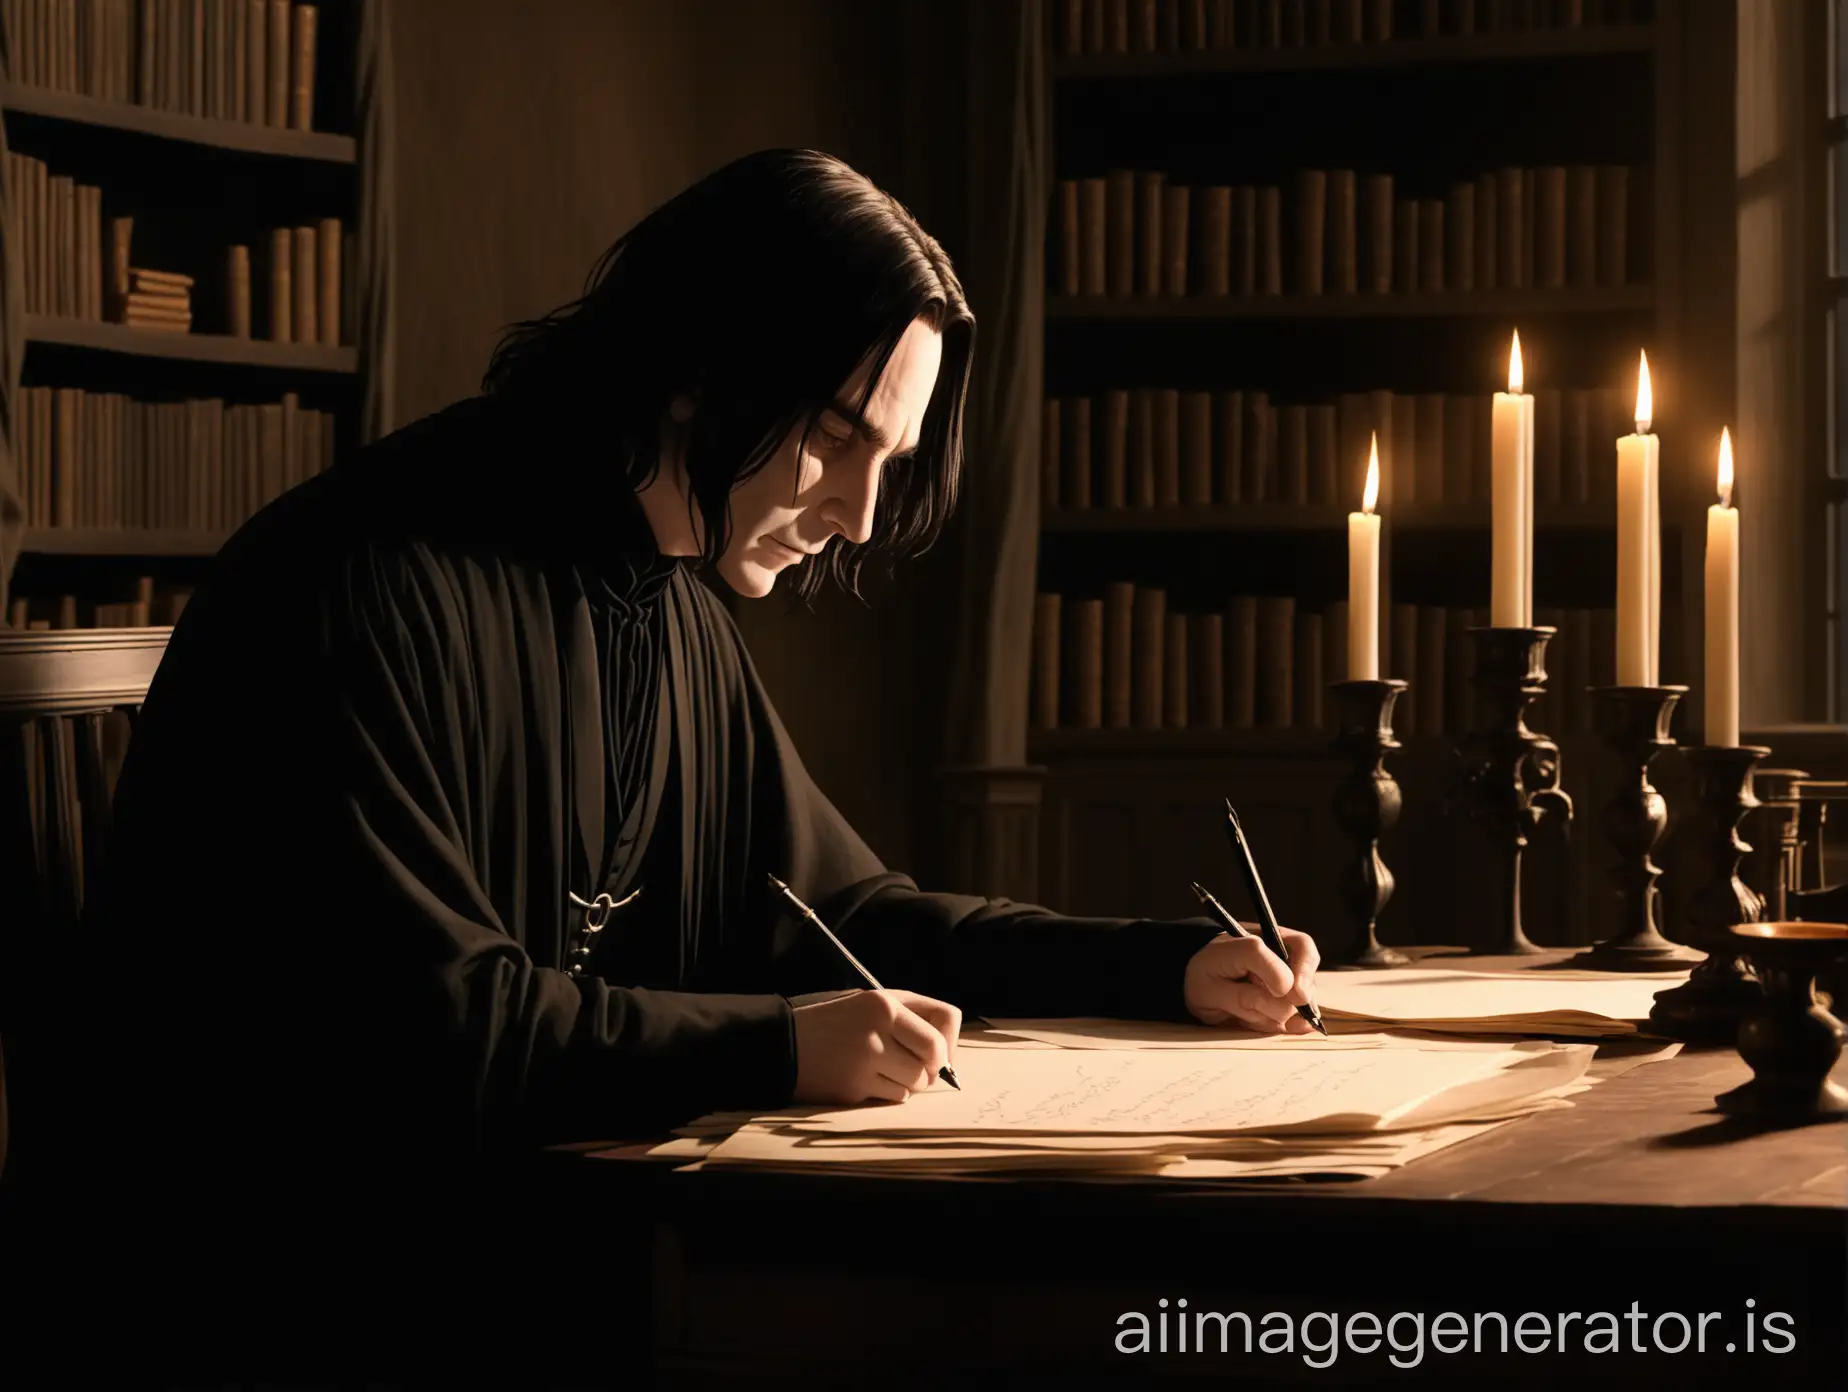 younger Severus Snape sitting at his desk in his study, lit only by candlelight, writing on papers, side profile